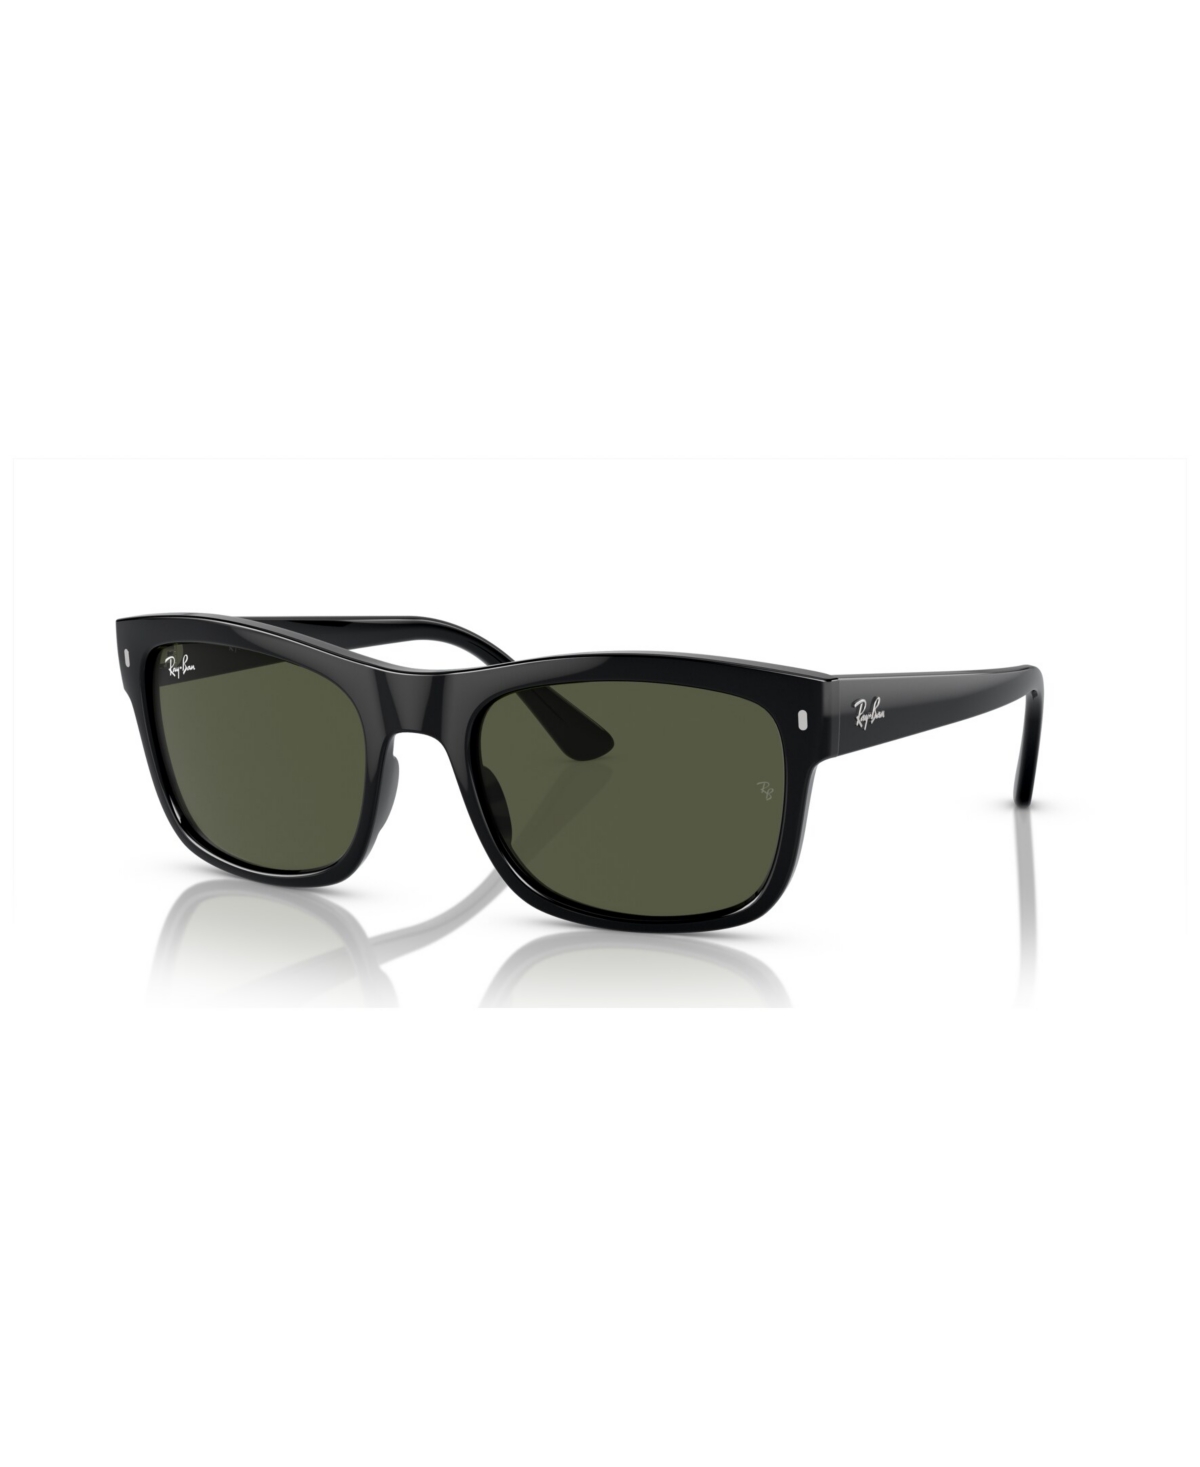 Ray Ban Unisex Sunglasses Rb4428 In Black